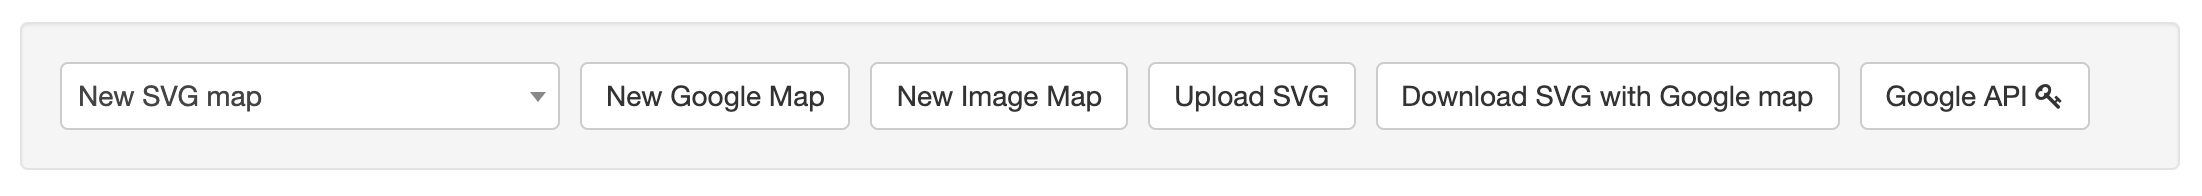 A screenshot of the MapSVG settings with options for the type of map to create. Options include Google Map, image map, upload SVG, download SVG with Google map, and Google API.